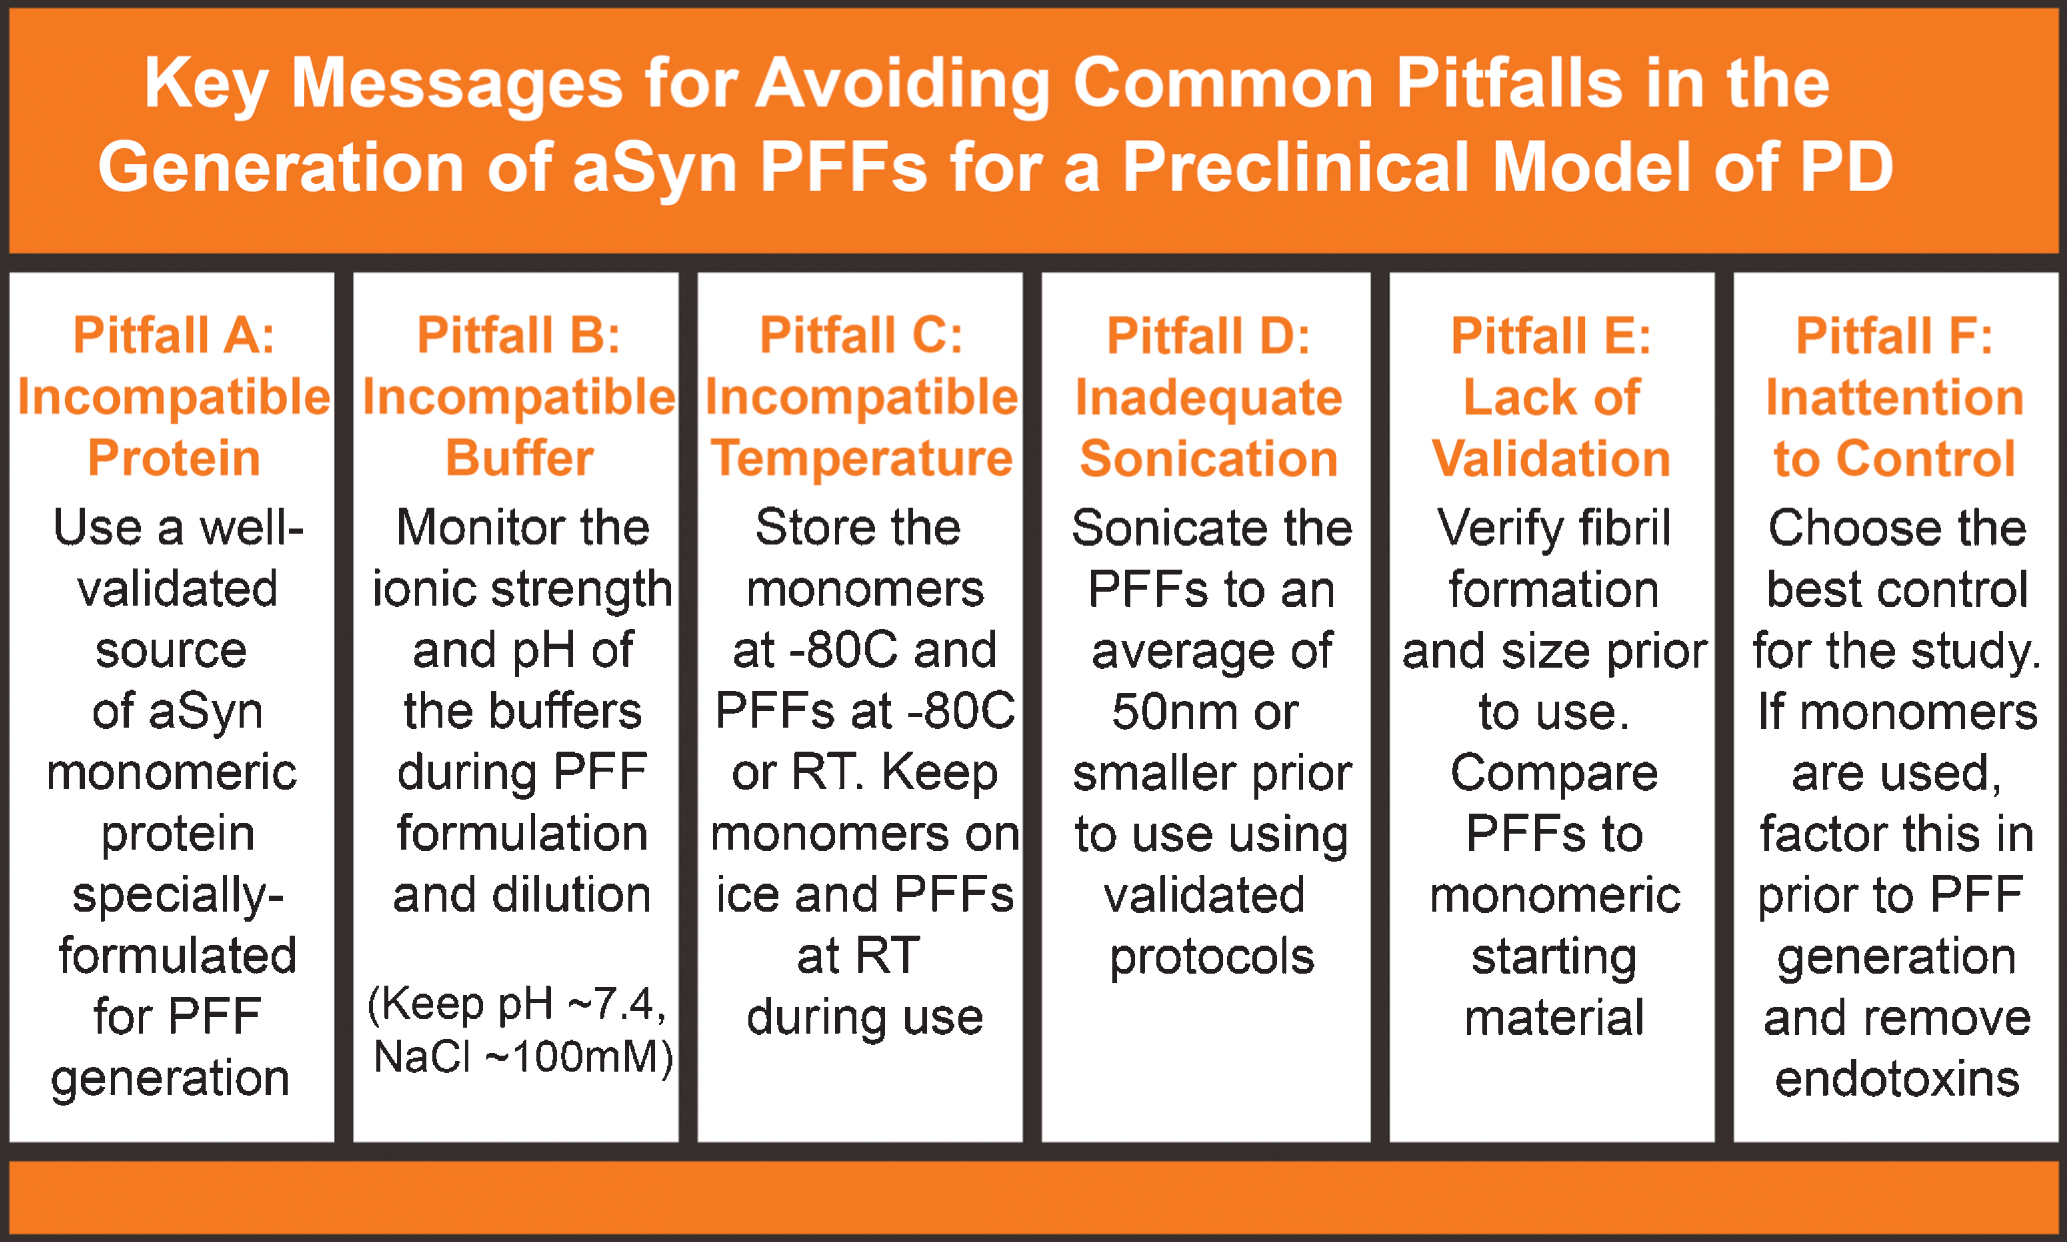 Common pitfalls in the alpha-synuclein pre-formed fibril (aSyn PFF) model and solutions for avoiding these mistakes. Six common issues that lead to lack of pathology or other issues in the aSyn PFF model include (A) using an incompatible protein as the monomeric starting material or injected material, (B) forming PFFs in an incompatible buffer, (C) storing or keeping solutions at the incorrect temperature, (D) inadequately sonicating the aSyn PFF sample, (E) failing to validate the aSyn PFFs have the proper biophysical and biochemical properties, and (F) choosing an unideal control or not accounting for the control when reserving aSyn monomeric protein. These are six very important factors to which attention should be paid and caution should be taken to avoid. Guidelines for how to avoid these pitfalls are included as well. aSyn, alpha-synuclein; PFF, pre-formed fibril; RT, room temperature.